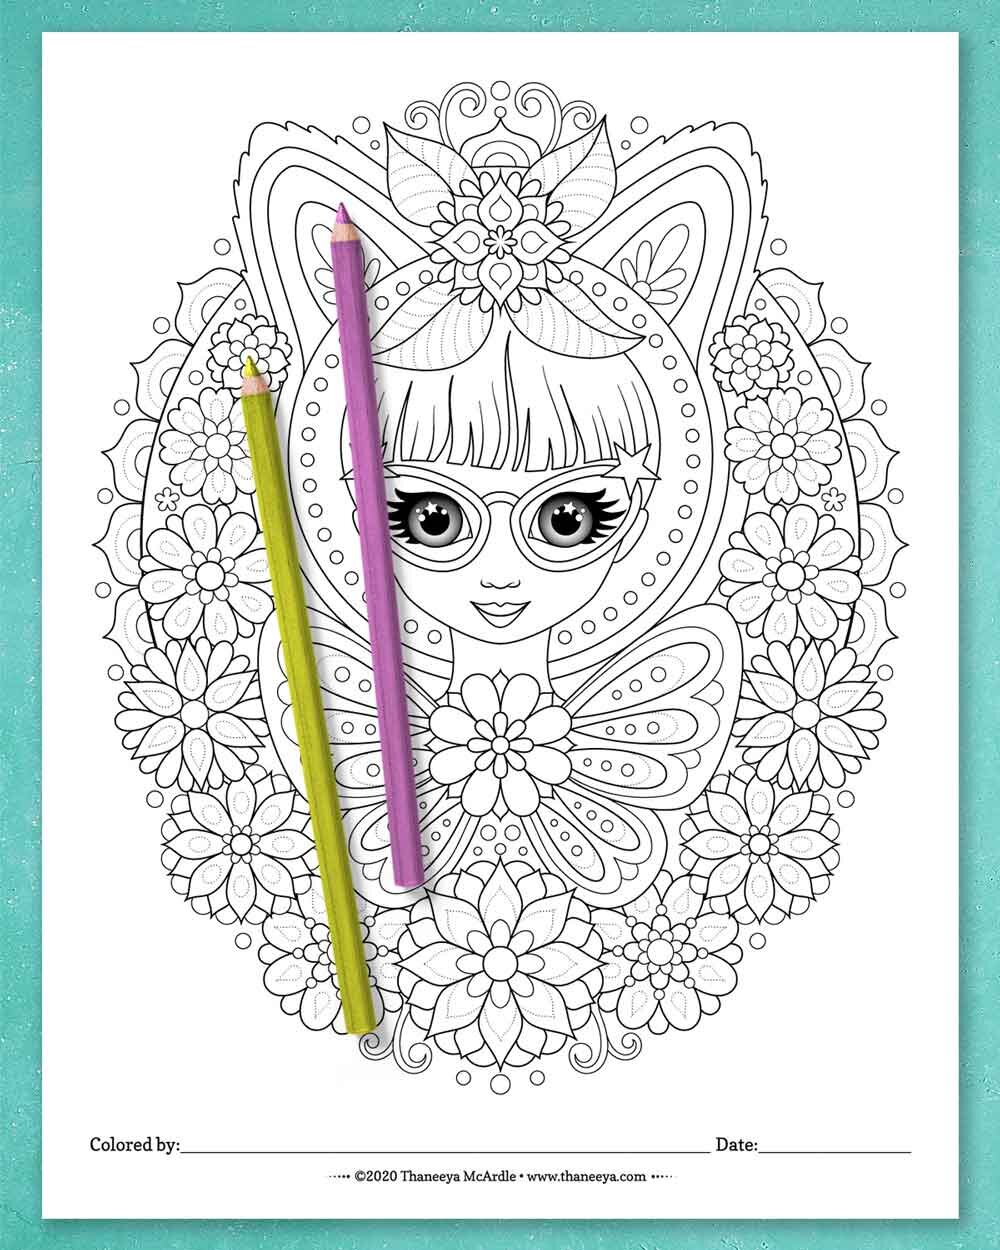 Cute cat butterfly girl coloring page by Thaneeya McArdle